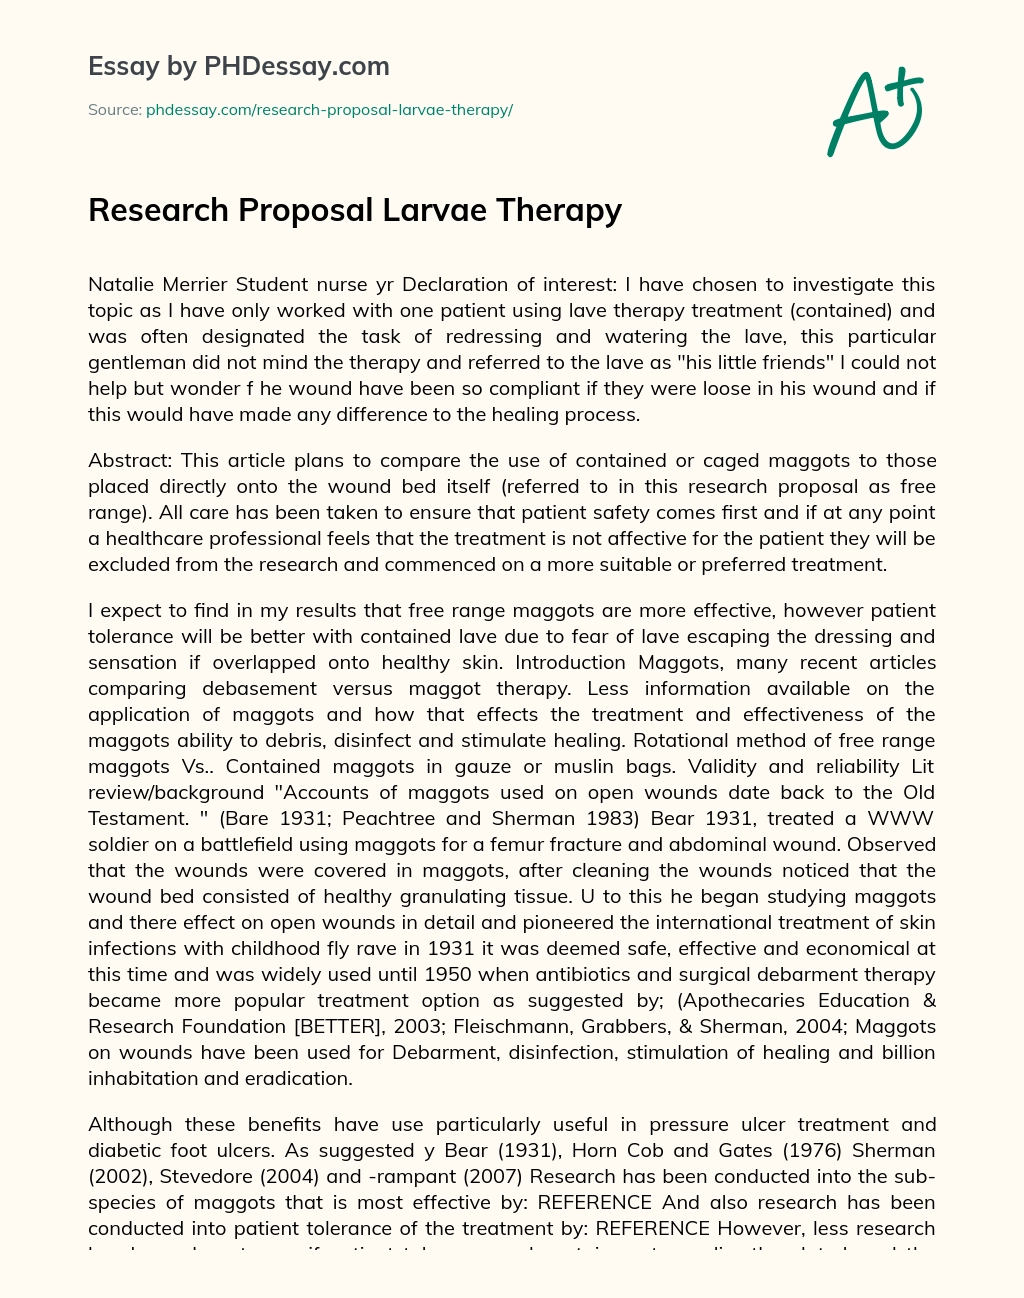 Research Proposal Larvae Therapy essay